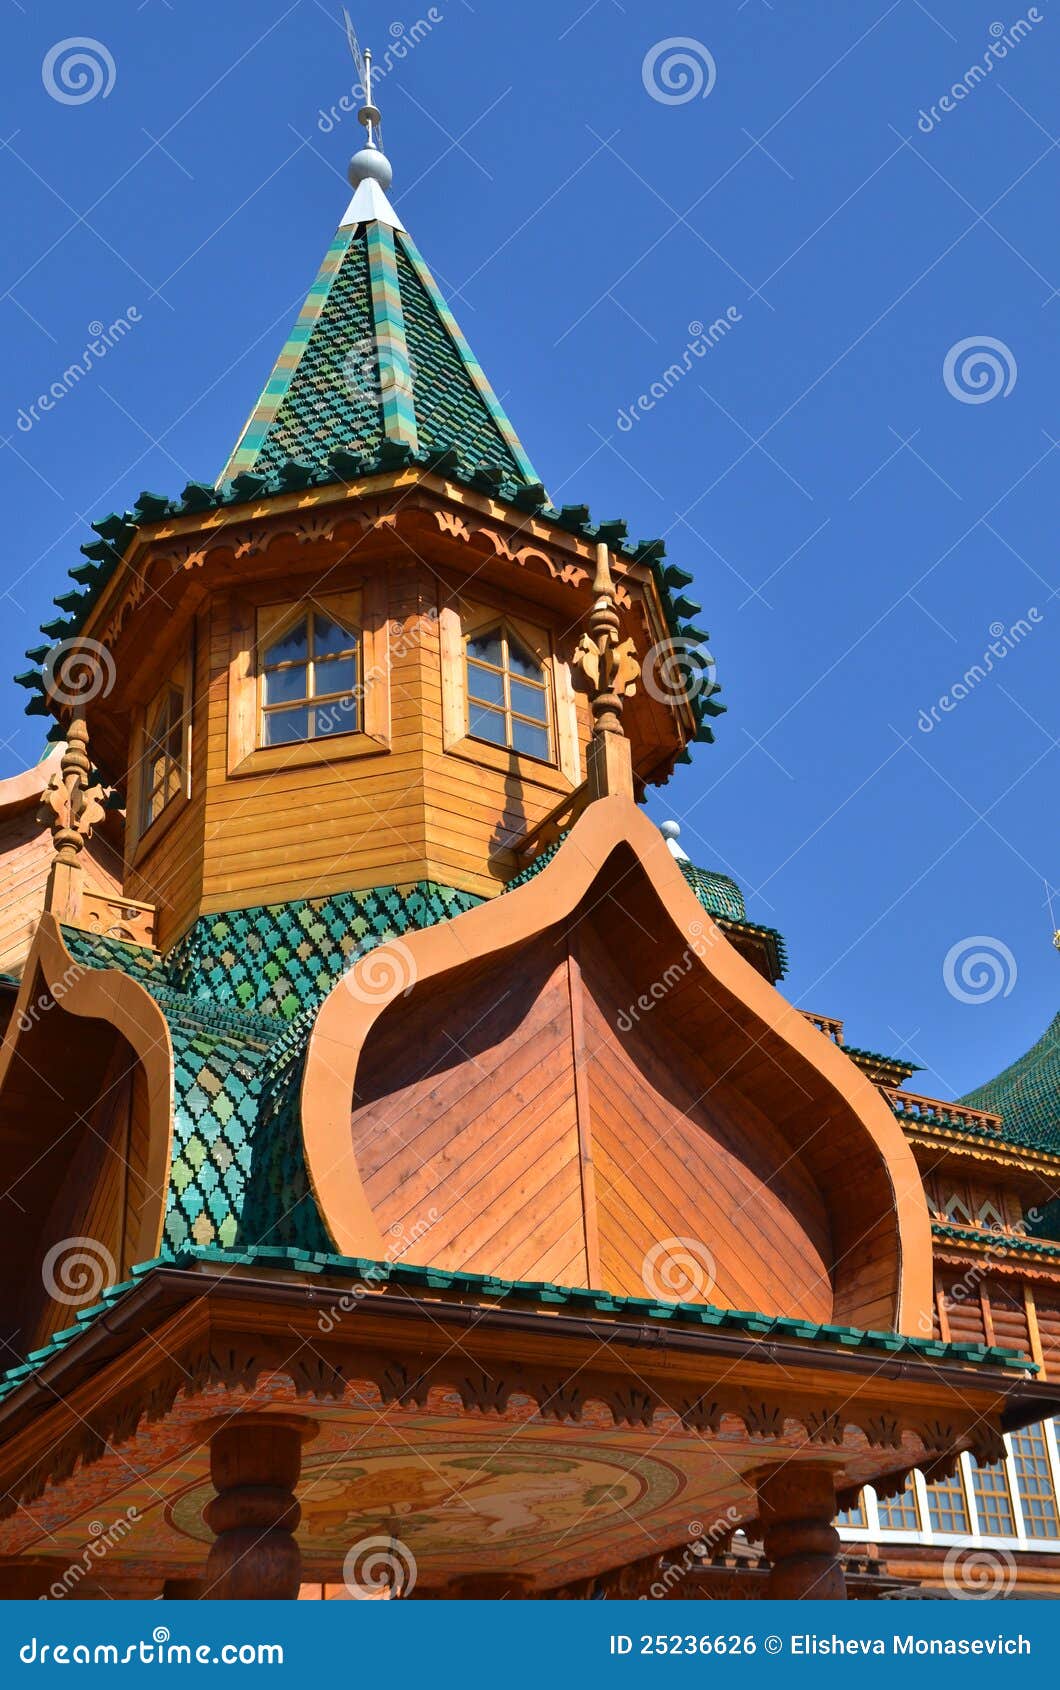 roof of tower in wooden palace of tzar in moscow